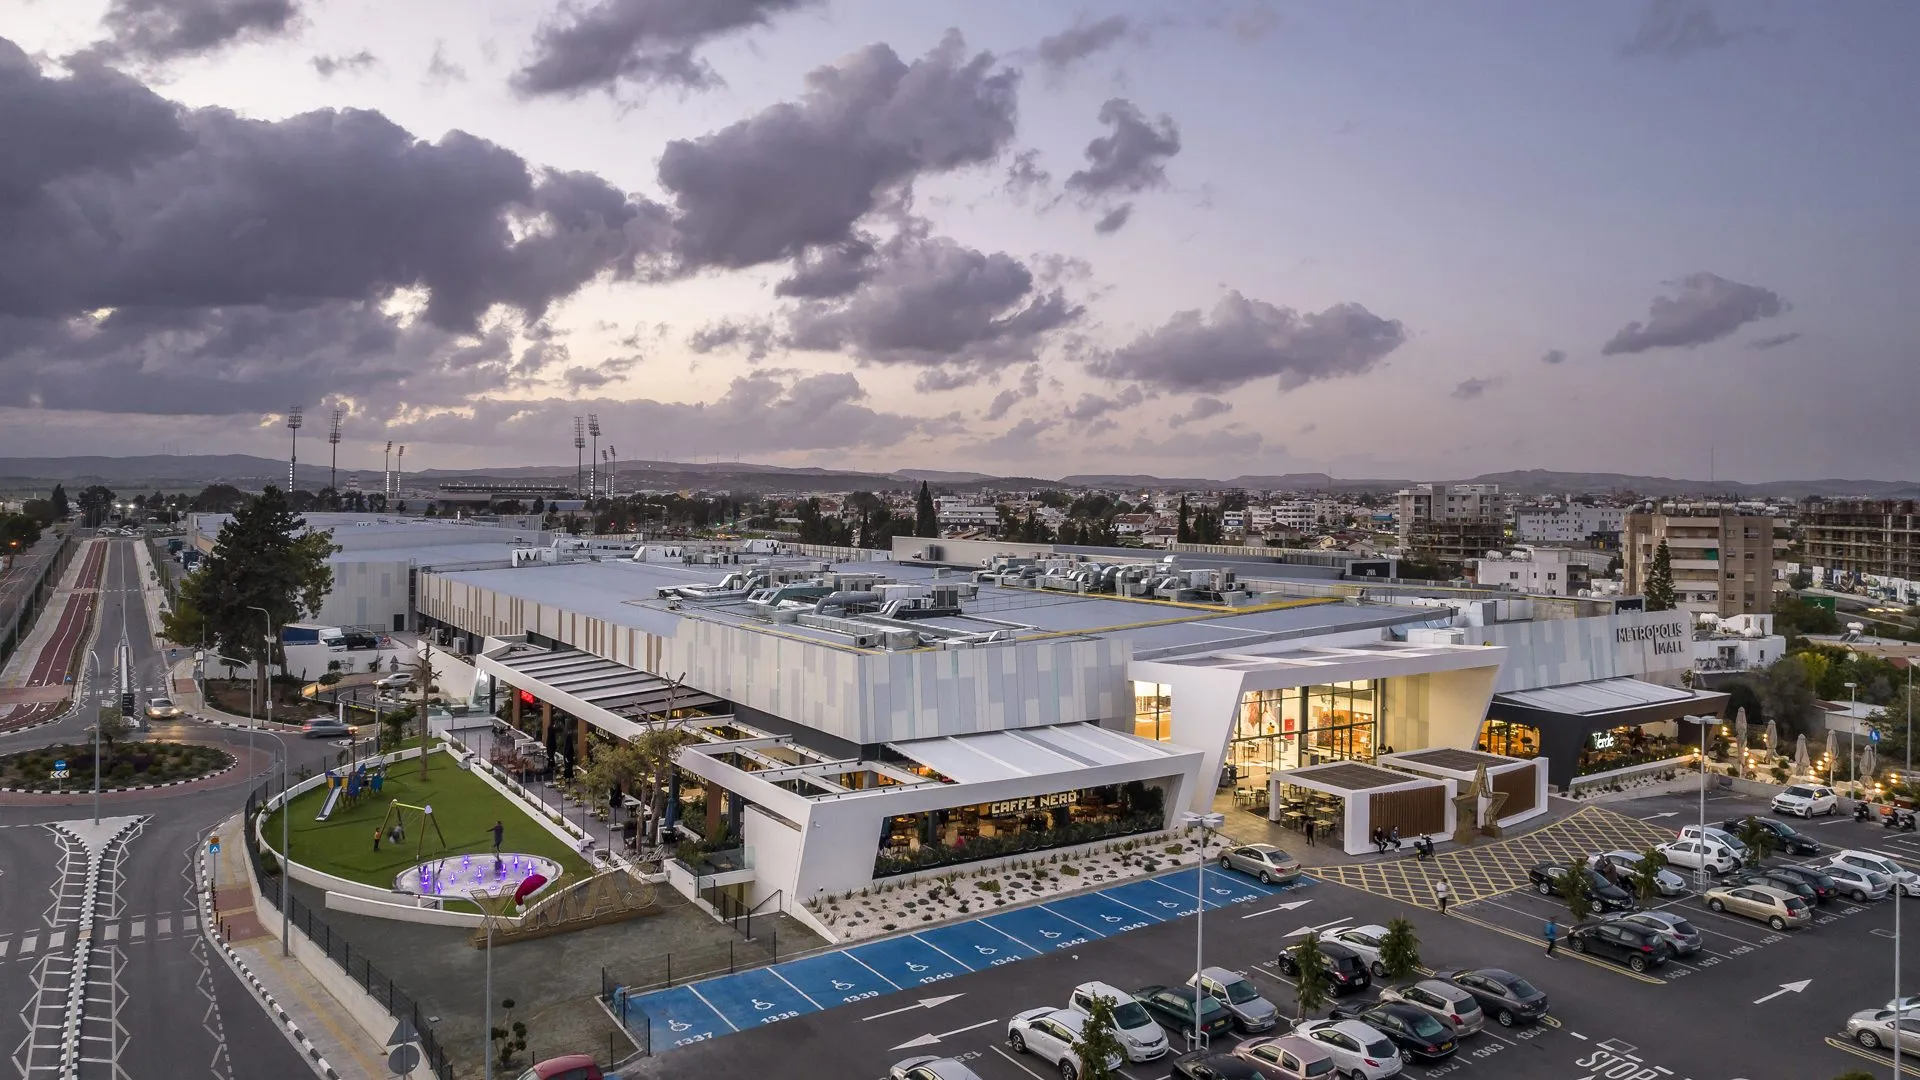 Metropolis Mall of Larnaca in Cyprus, europe | Shoes,Clothes,Home Decor,Natural Beauty Products,Cosmetics,Swimwear - Country Helper